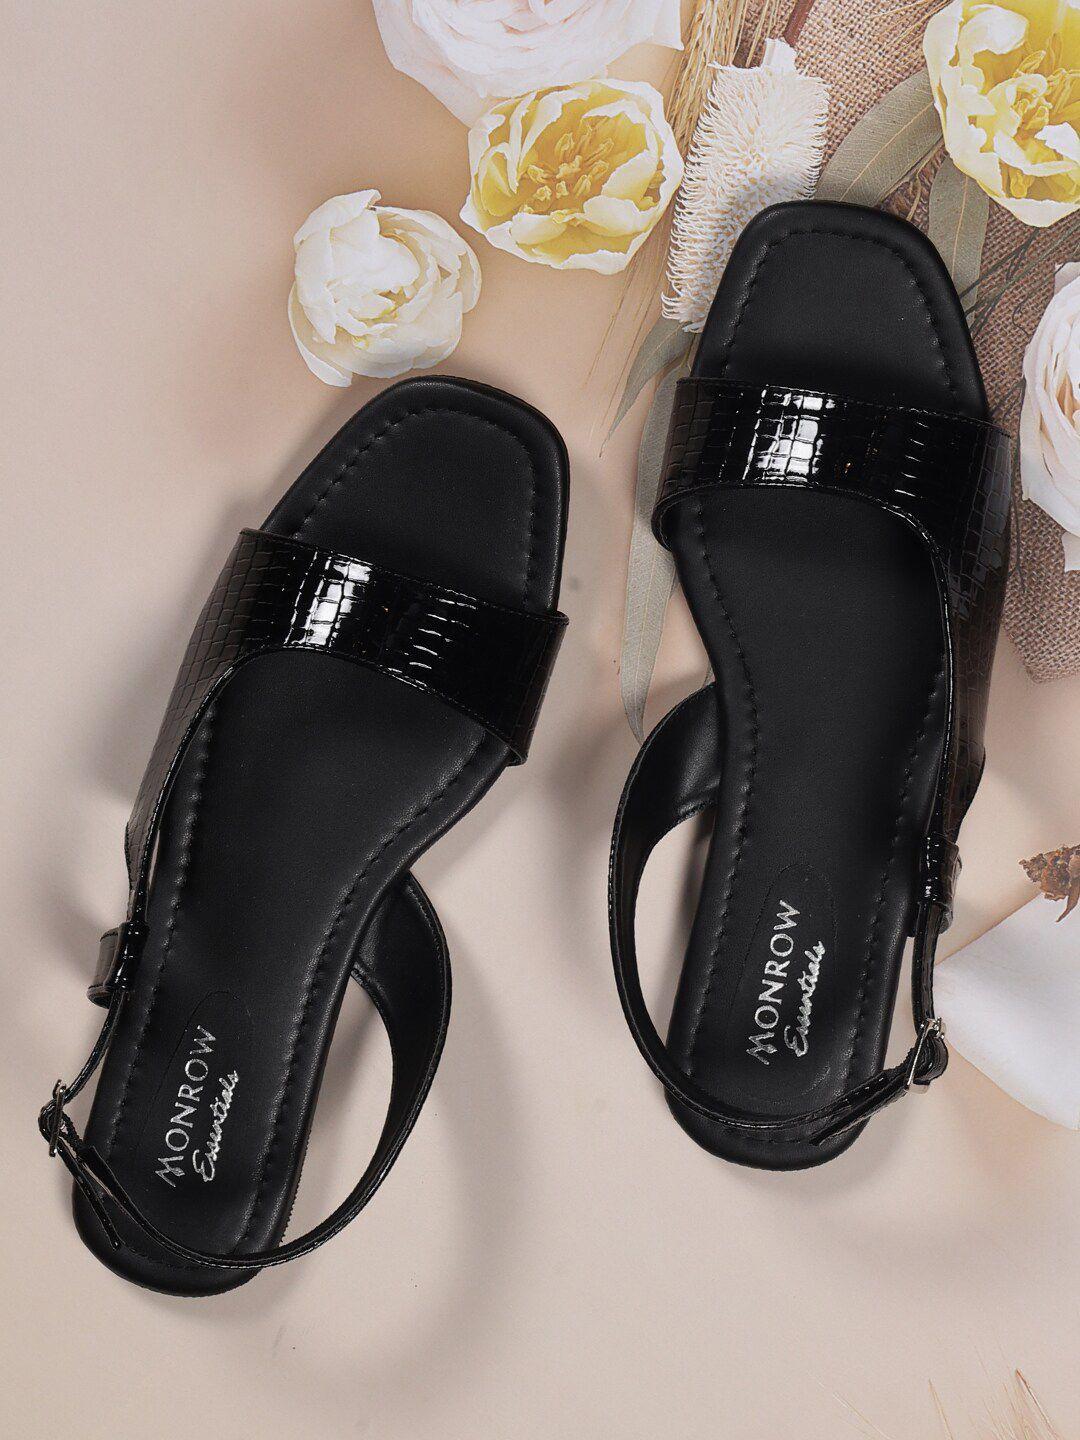 monrow-women-black-printed-open-toe-flats-with-buckles